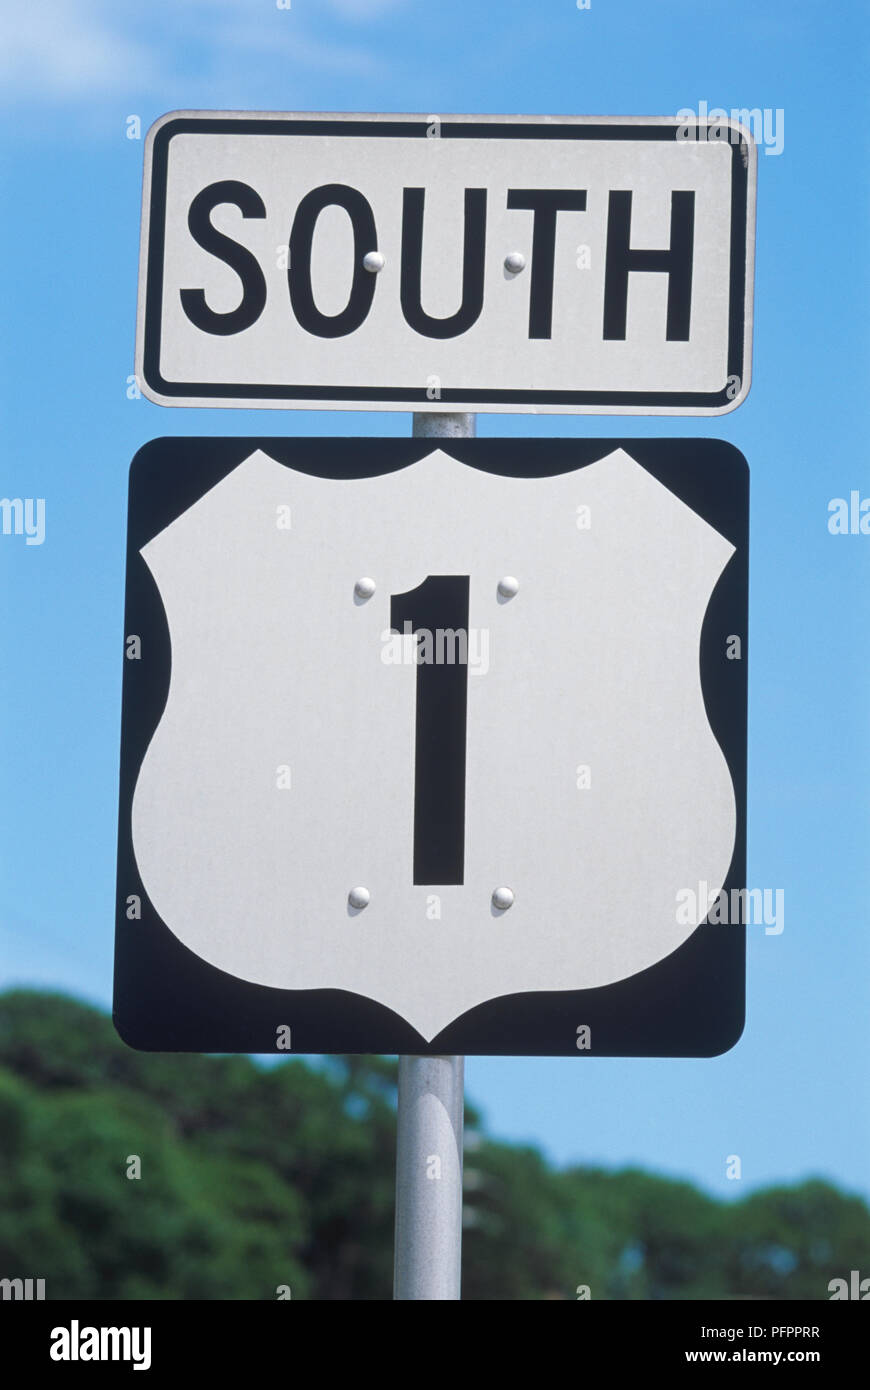 USA, Florida, Road sign for US Highway 1, south Stock Photo